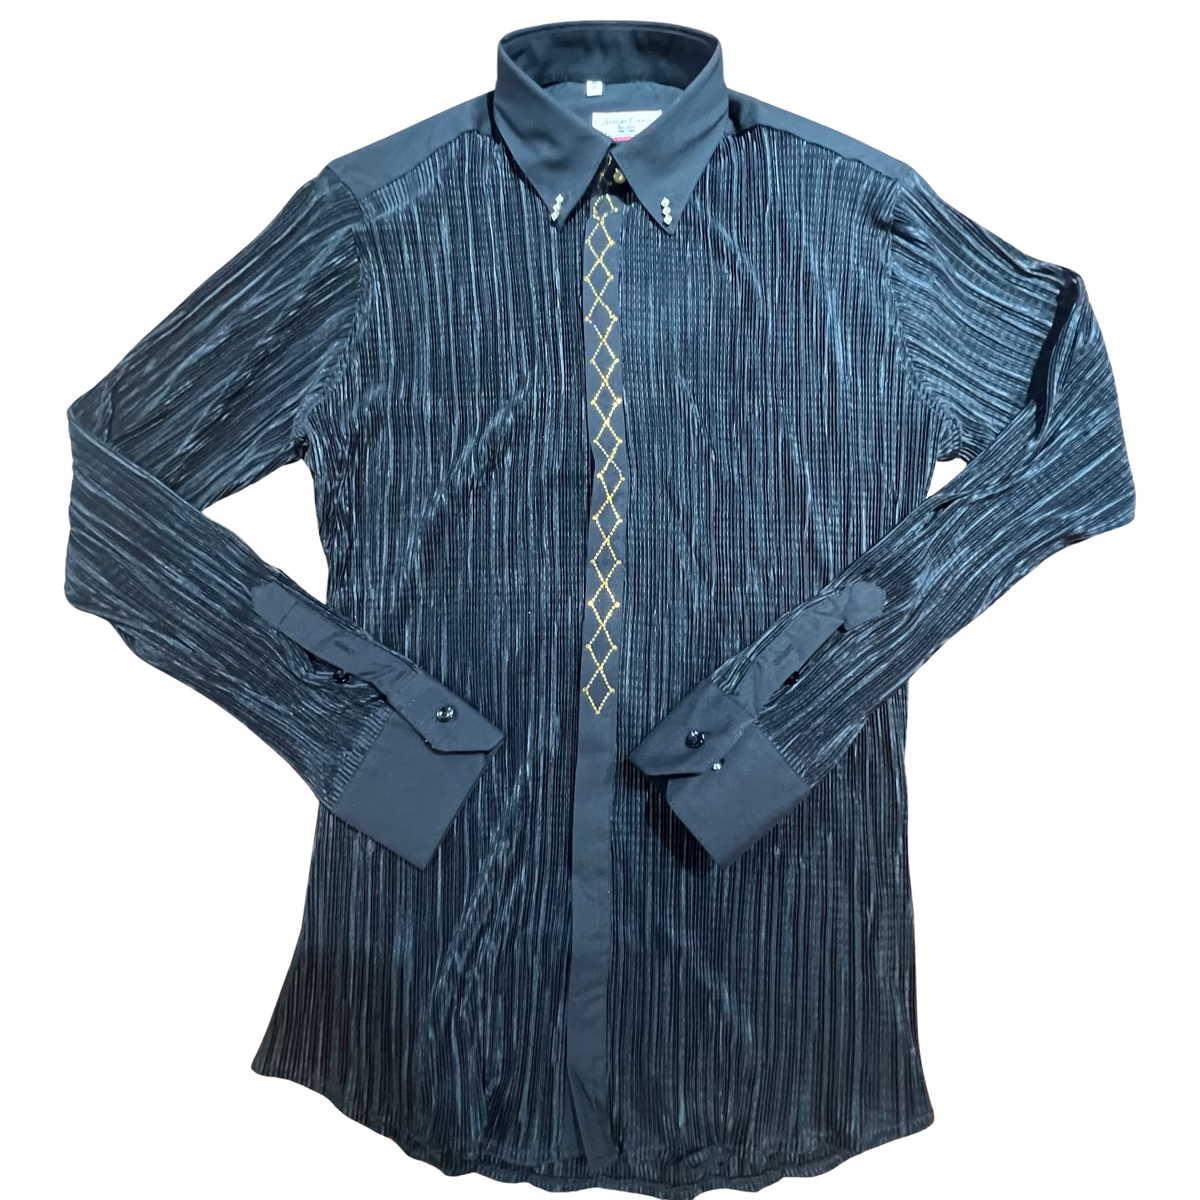 Lorenzzo Franco Pleated Gold Crystal Button Up Shirt - Dudes Boutique